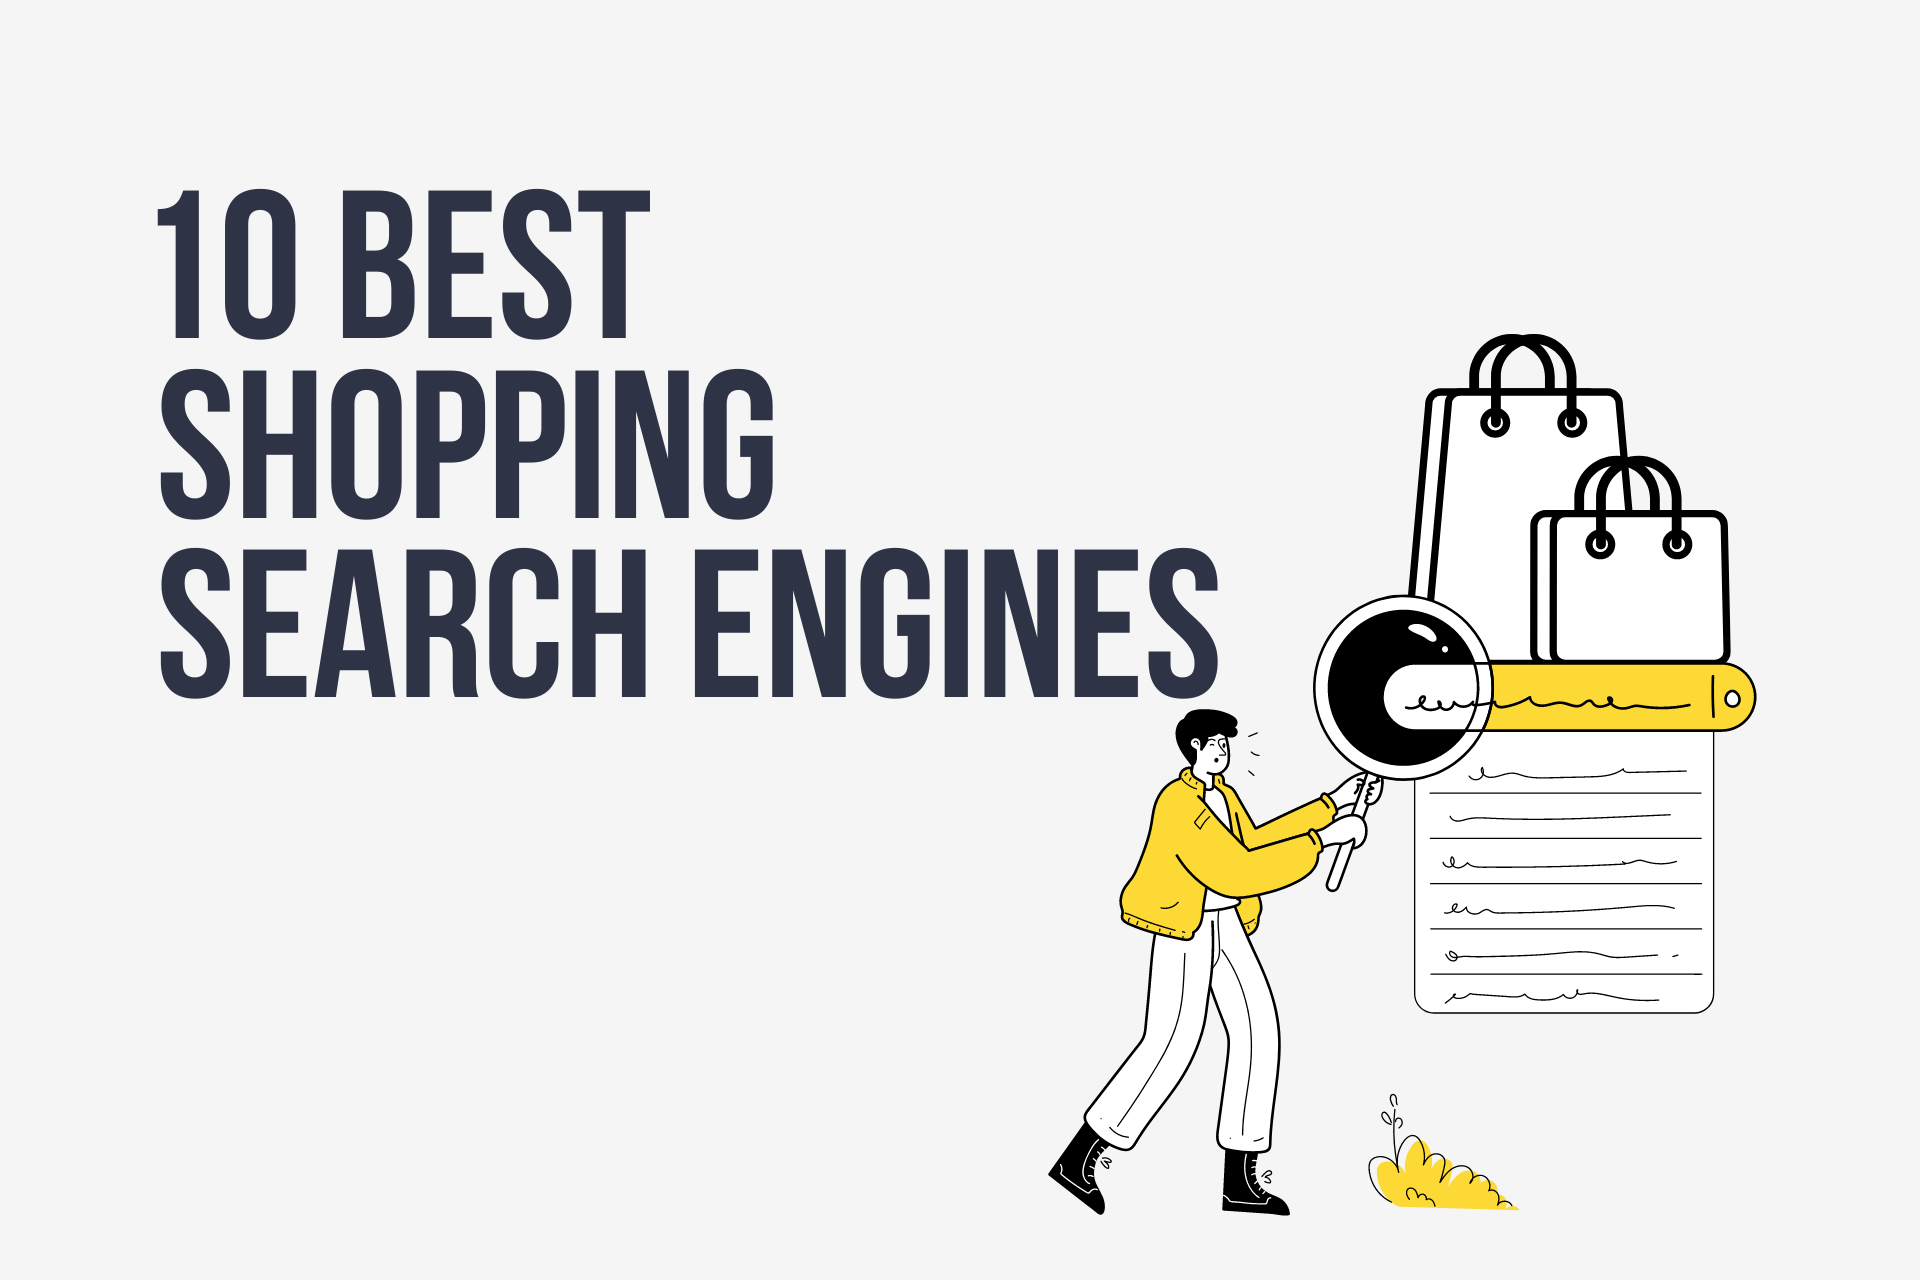 10 best shopping search engines in 2023 blog cover image including the illustration of a man holding a magnifying glass on a search bar with shopping bags on top